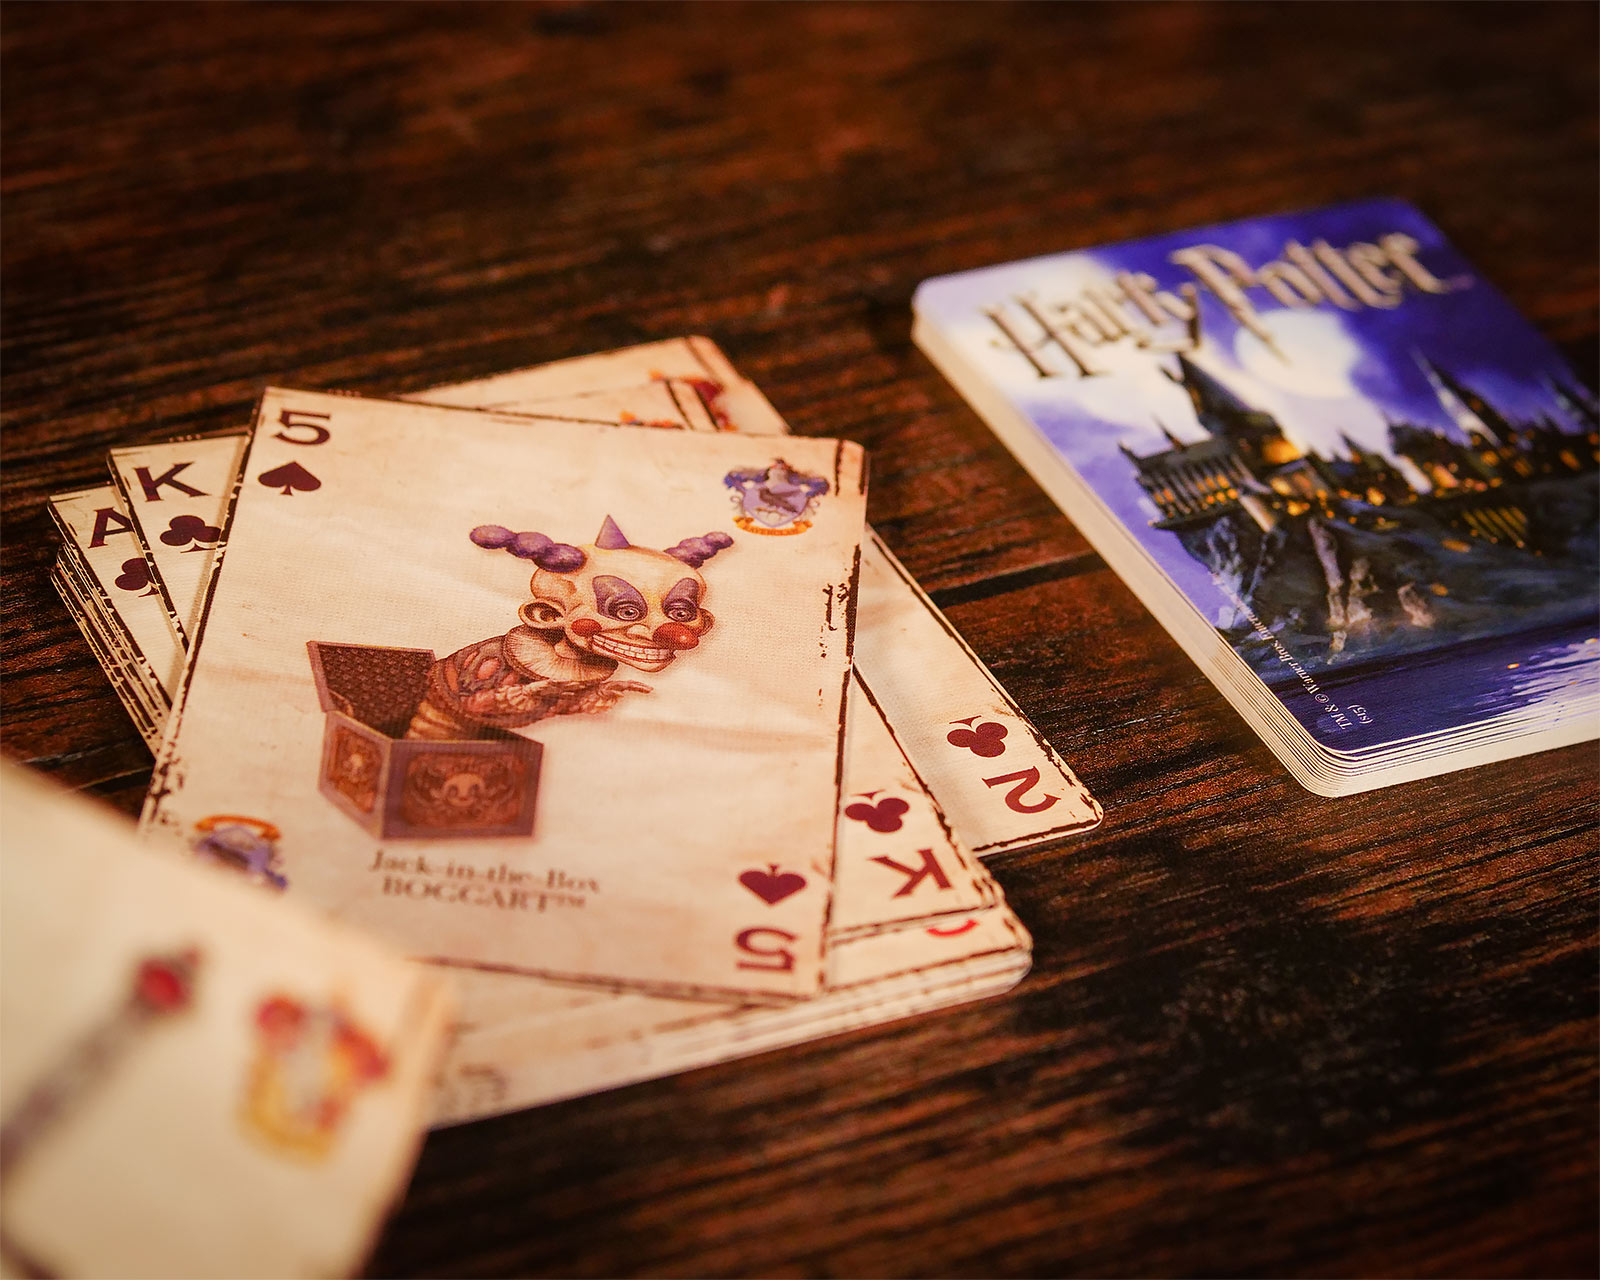 Harry Potter - Wizarding World Card Game